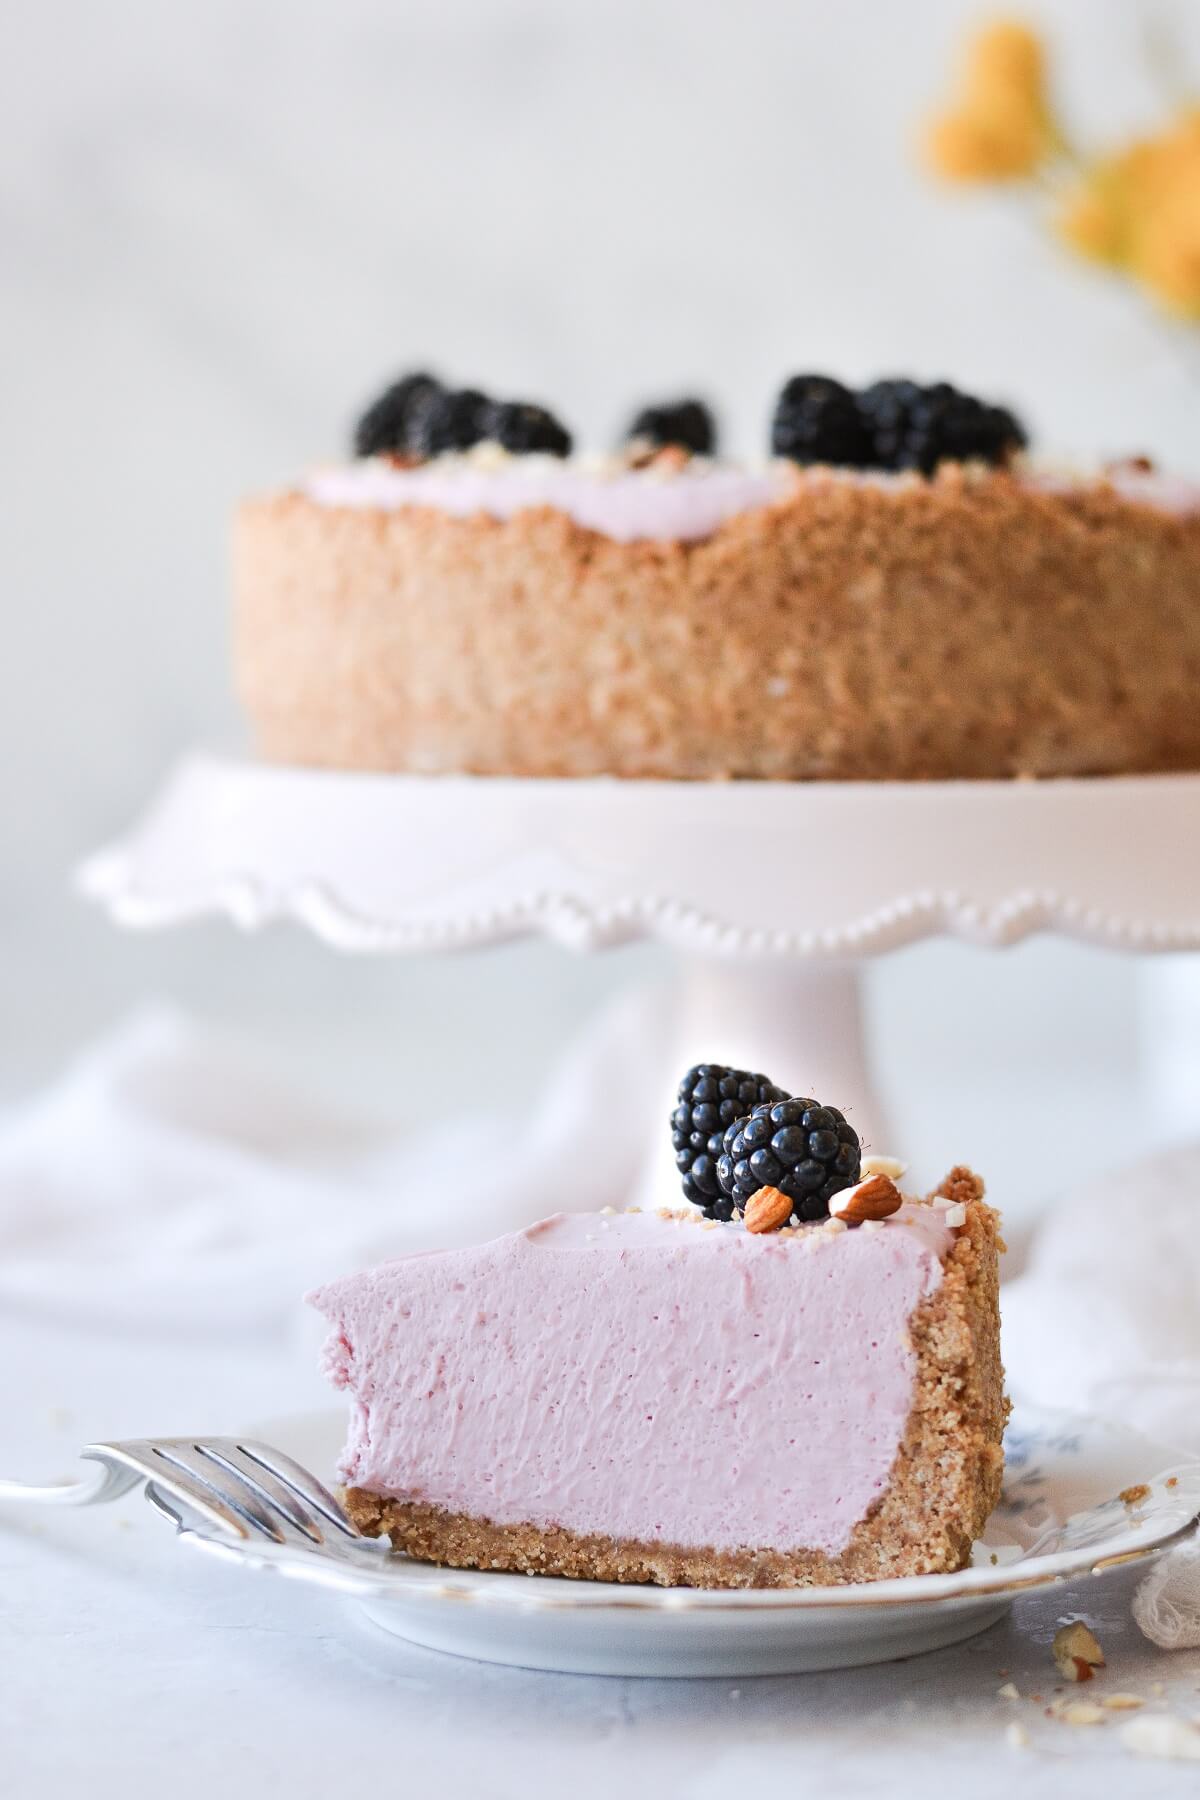 A slice of no bake blackberry cheesecake, topped with blackberries.